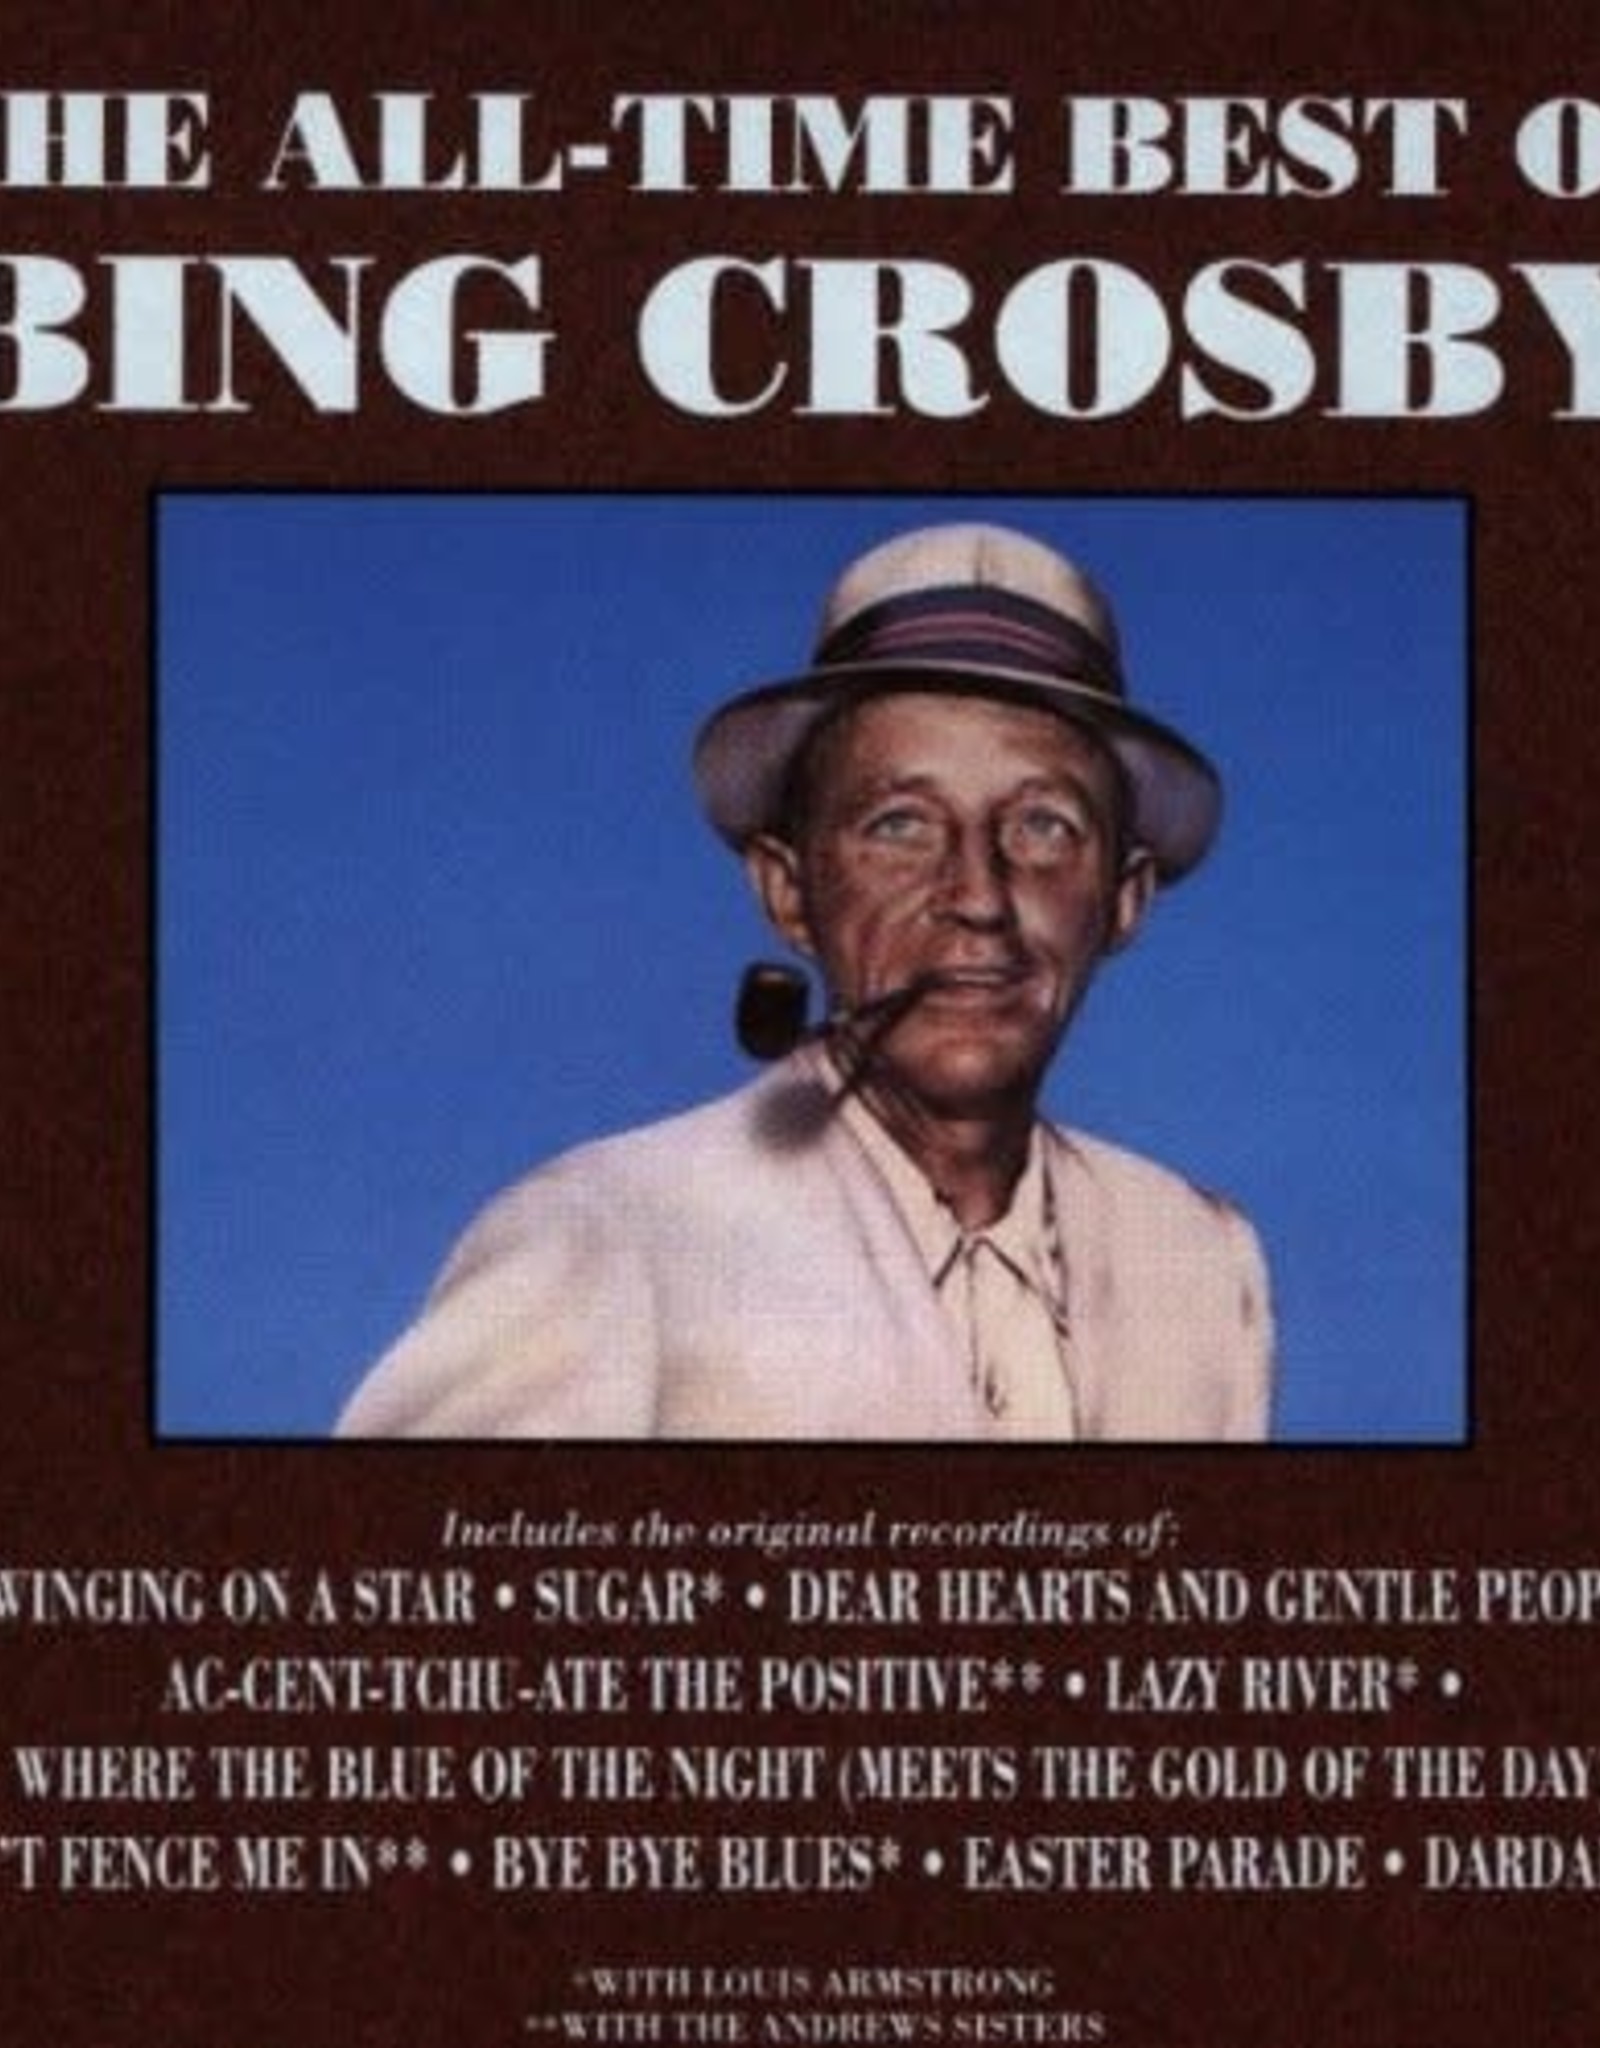 Bing Crosby - All-Time Best